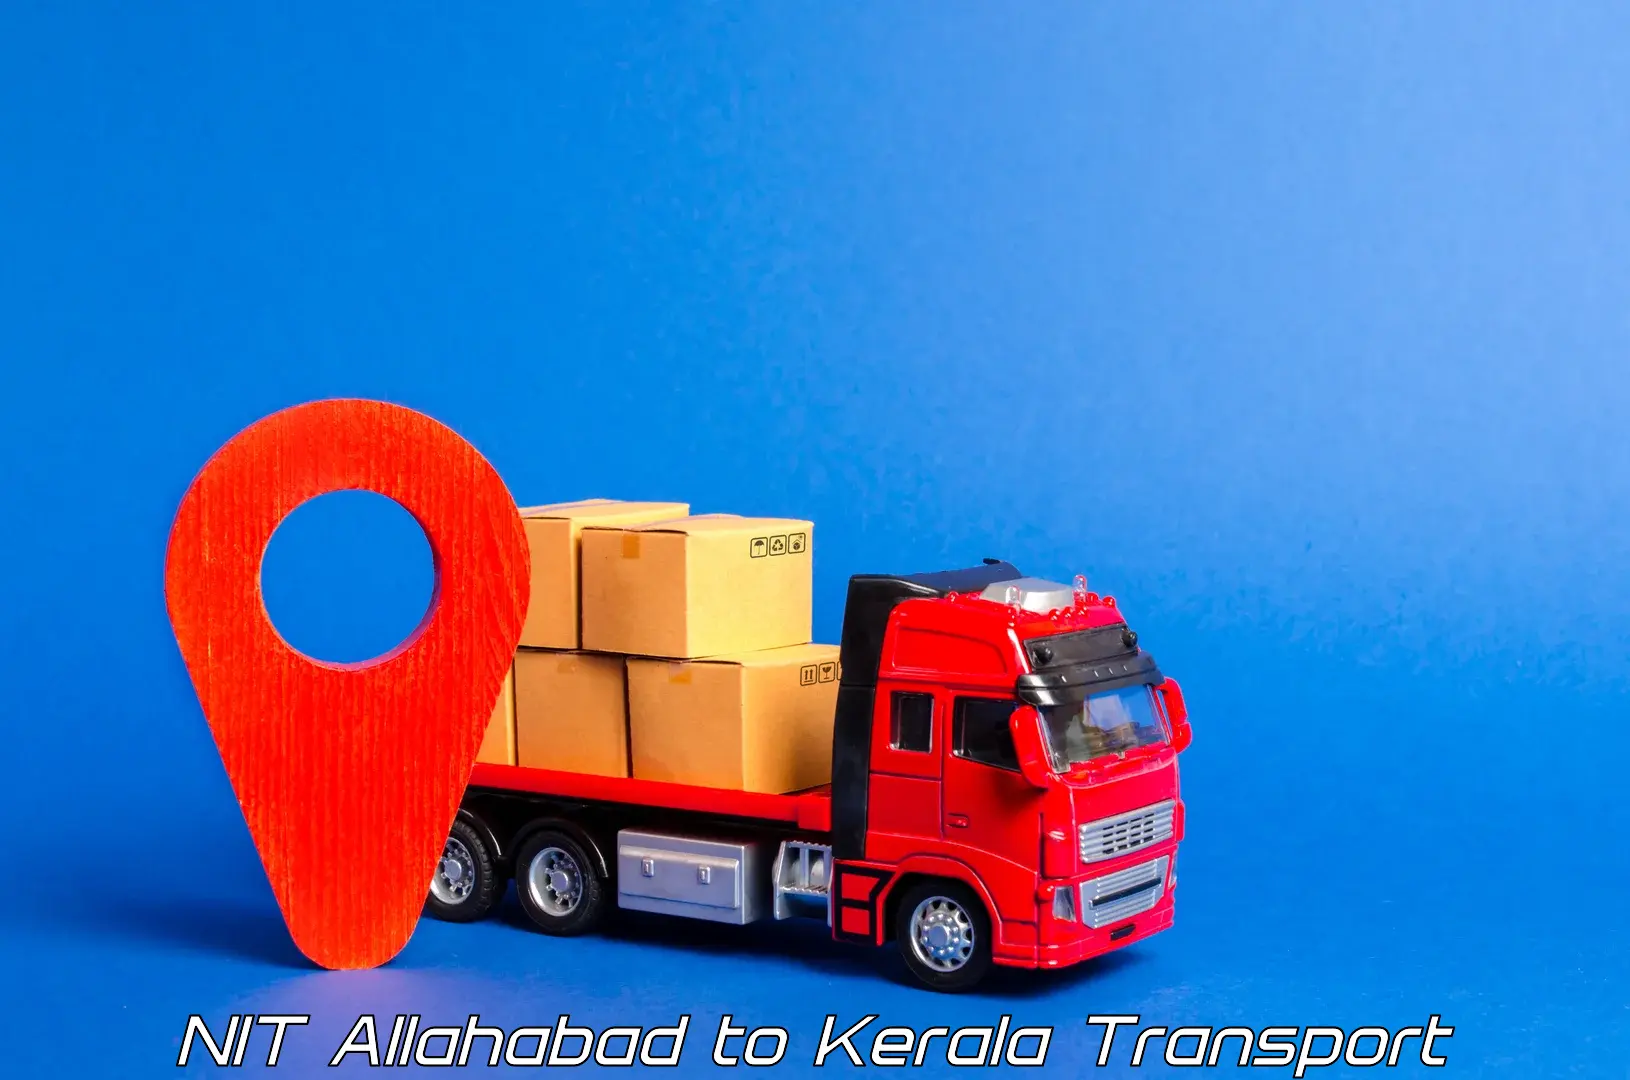 Nearby transport service NIT Allahabad to Kerala